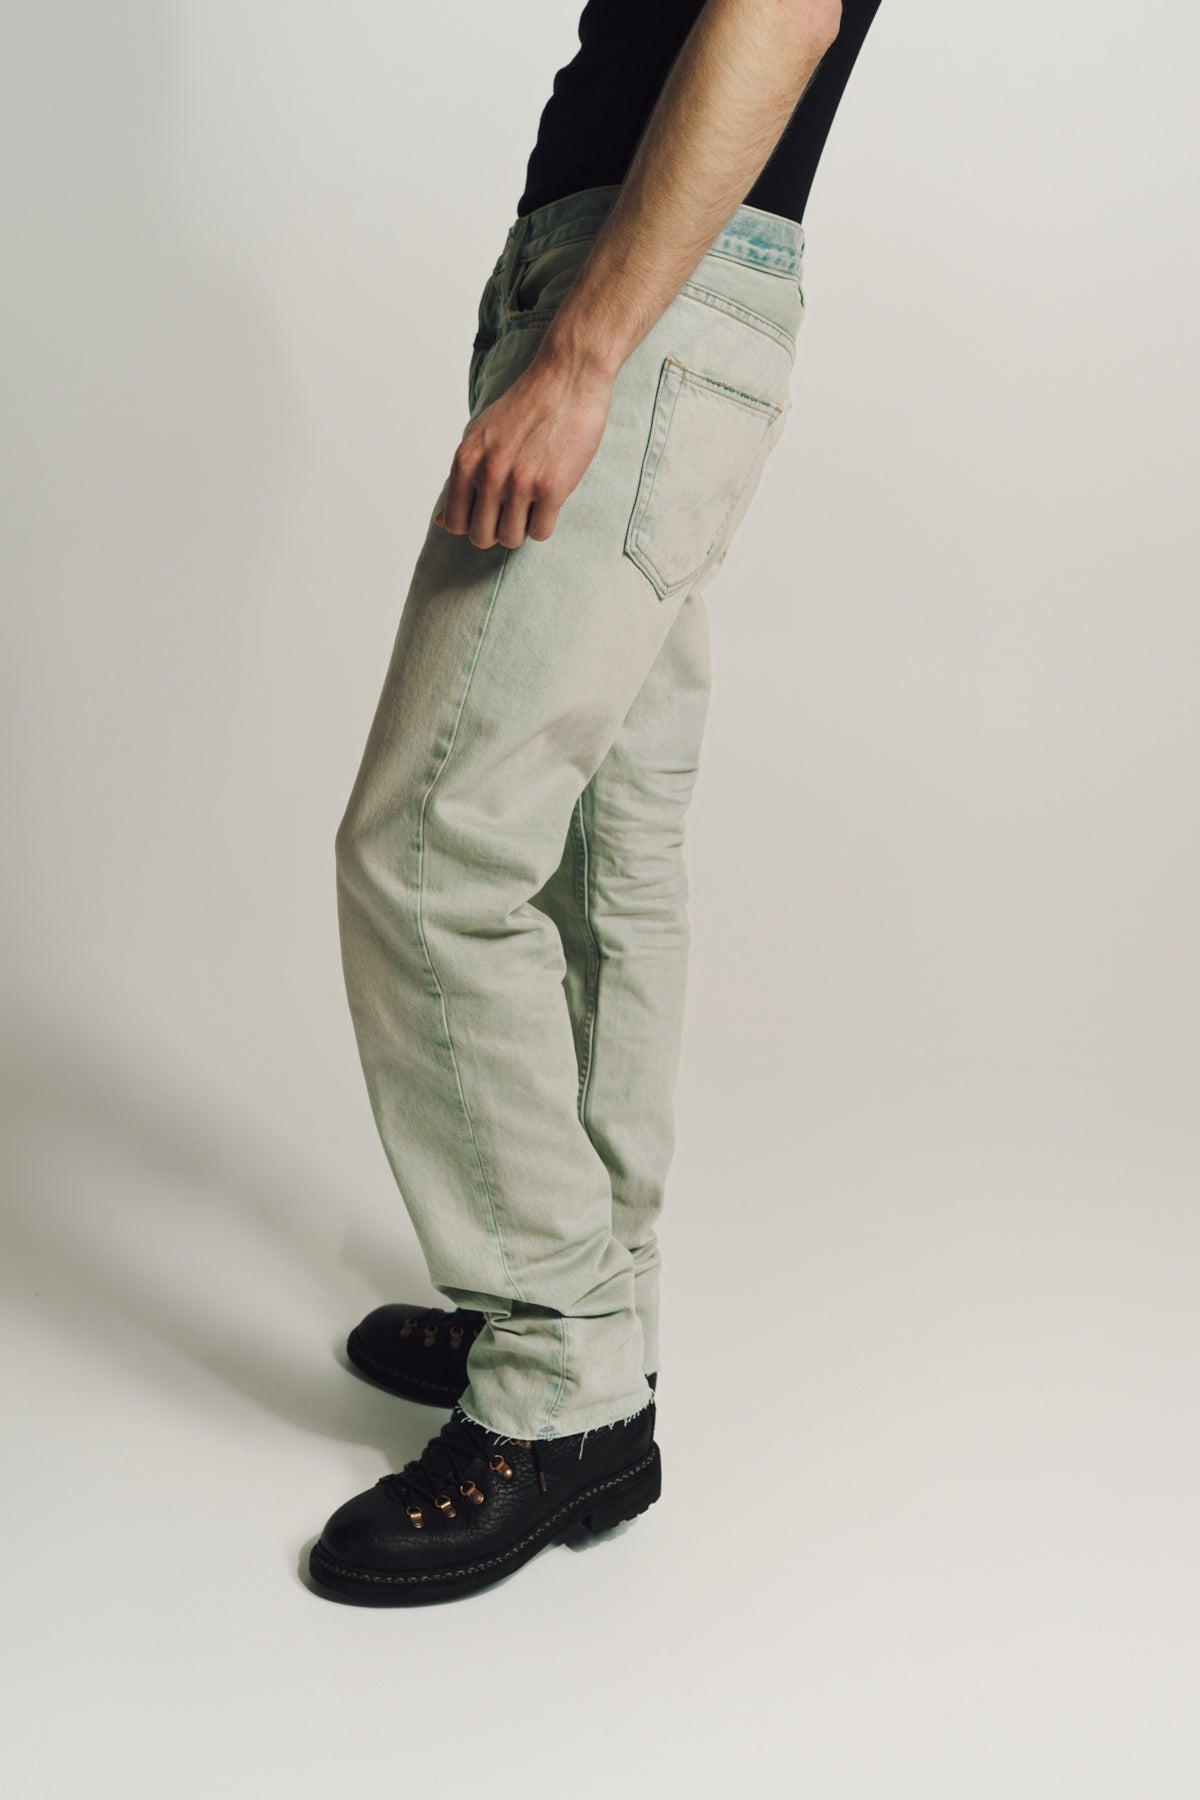 FEAR OF GOD | 8TH COLLECTION JEANS